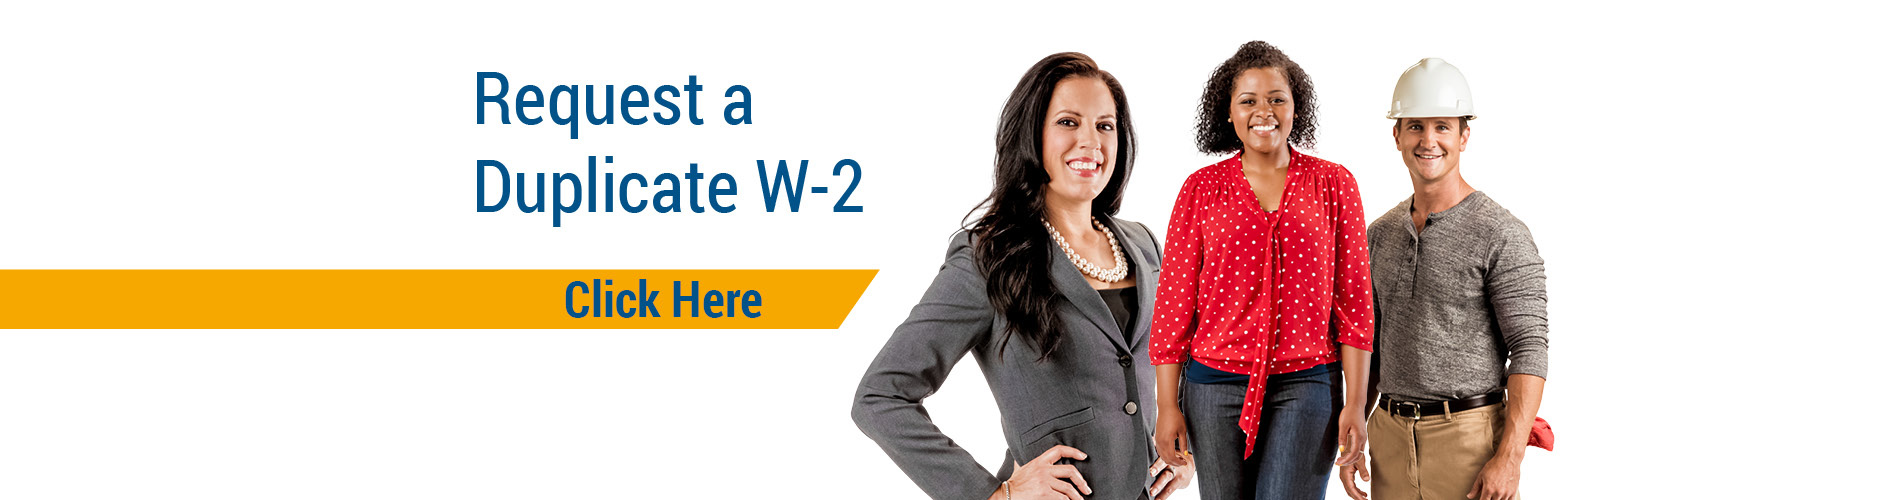 W-2 Duplicate Request Home Page Banner